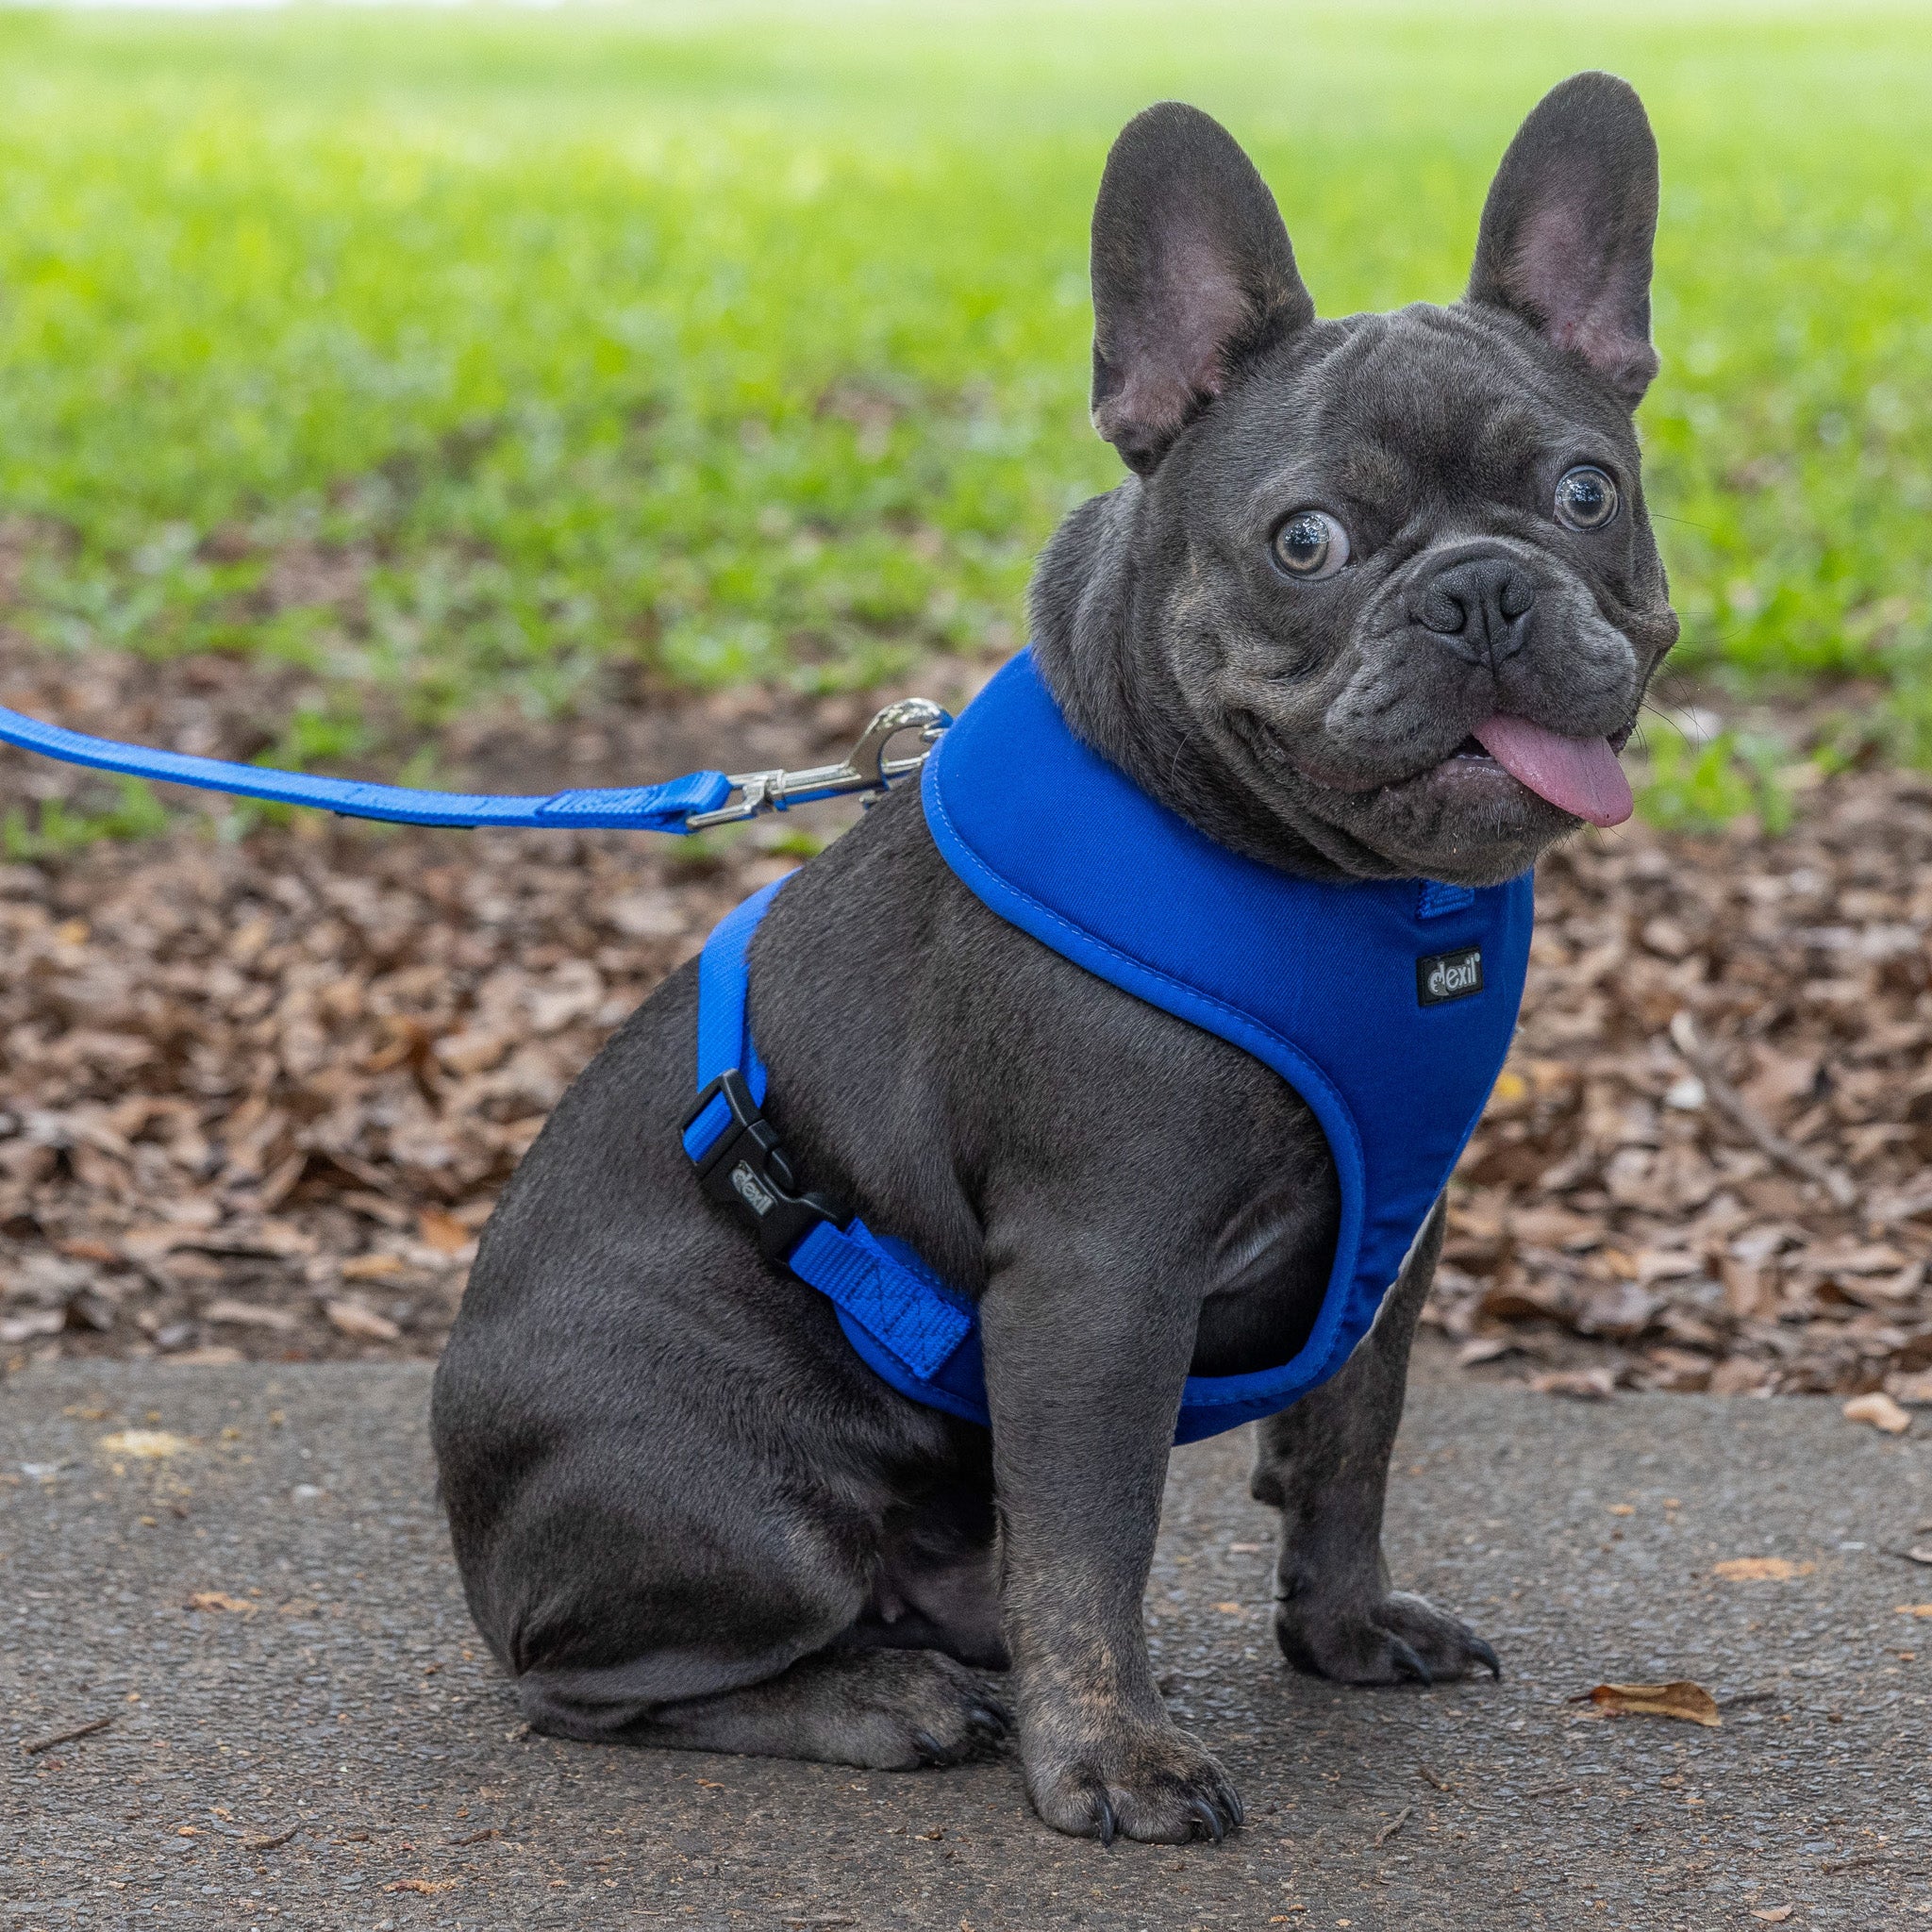 Friendly Dog Collars by Dexil Blue Dog Harness